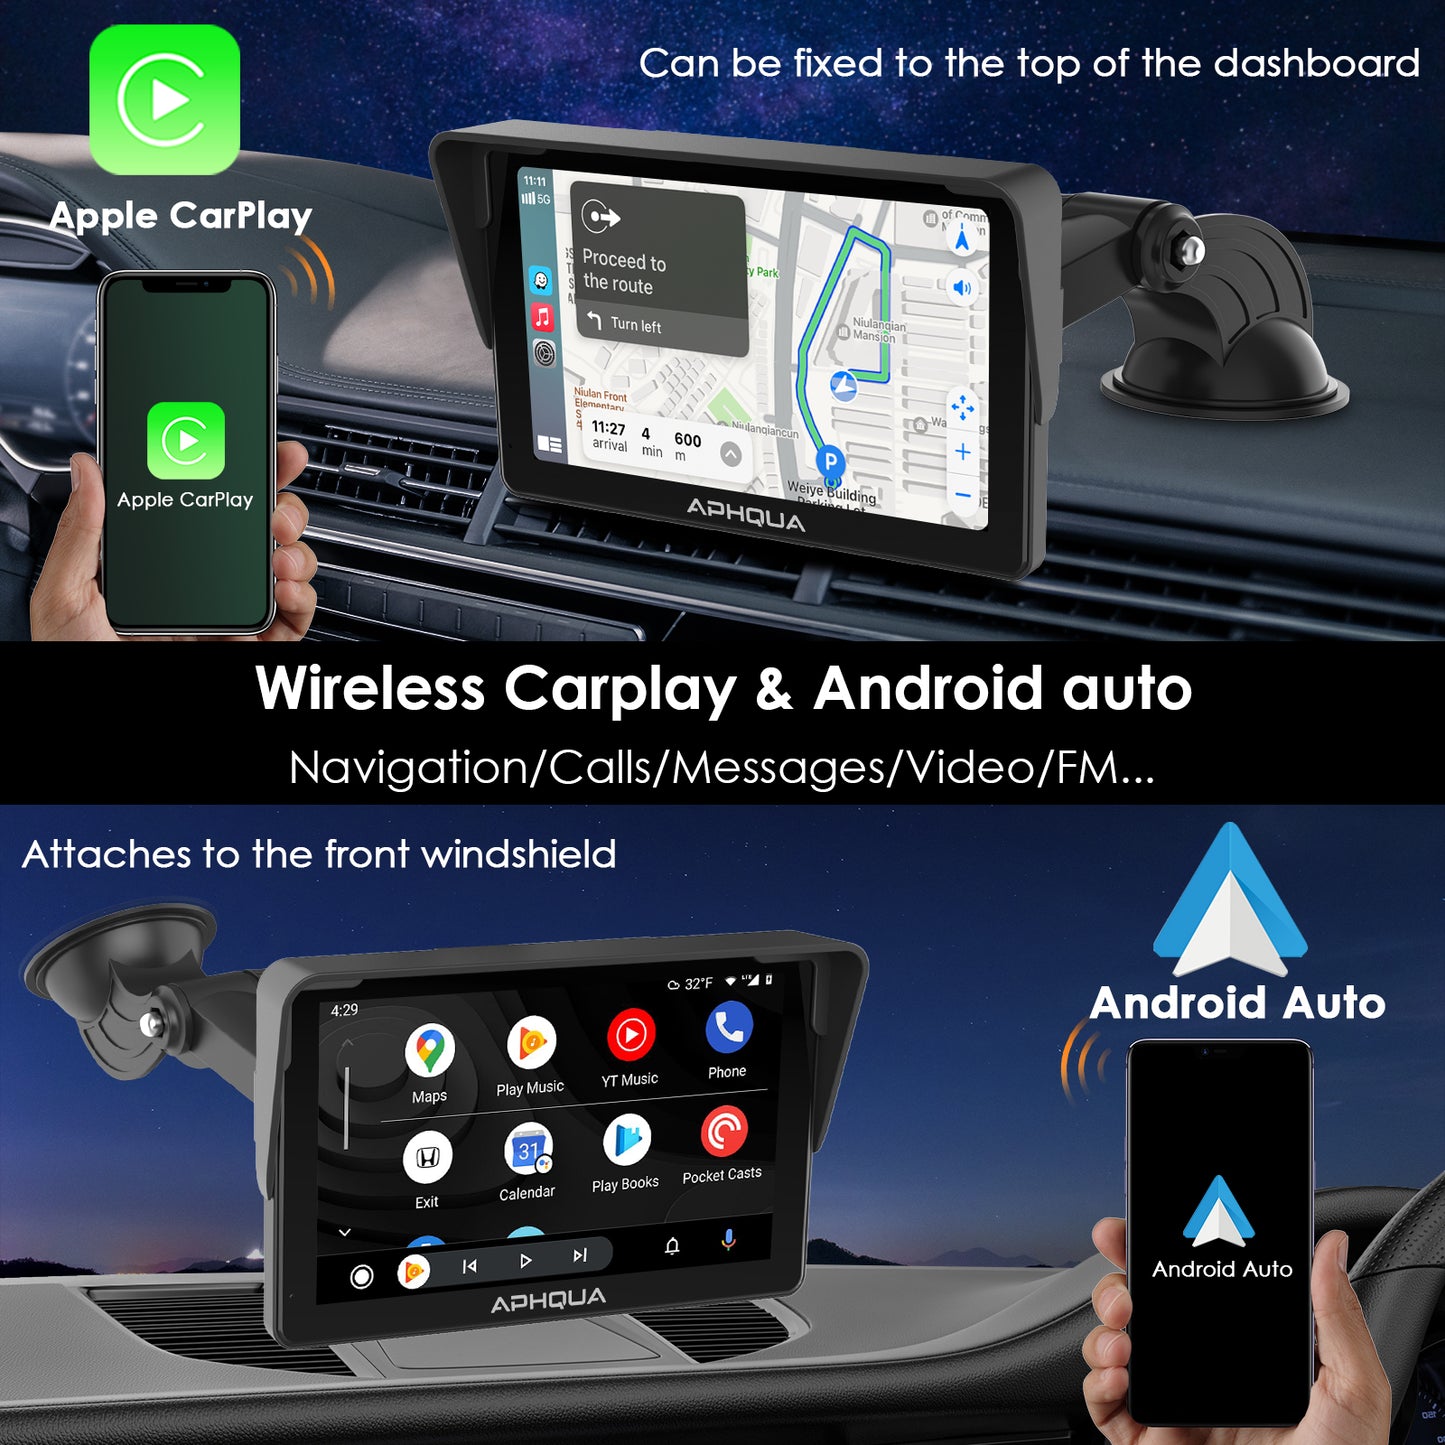 APHQUA A3 Portable Wireless Apple CarPlay and Android Auto with Detachable Sunshade, 7 inch Touch Screen Display for All Vehicle&Truck